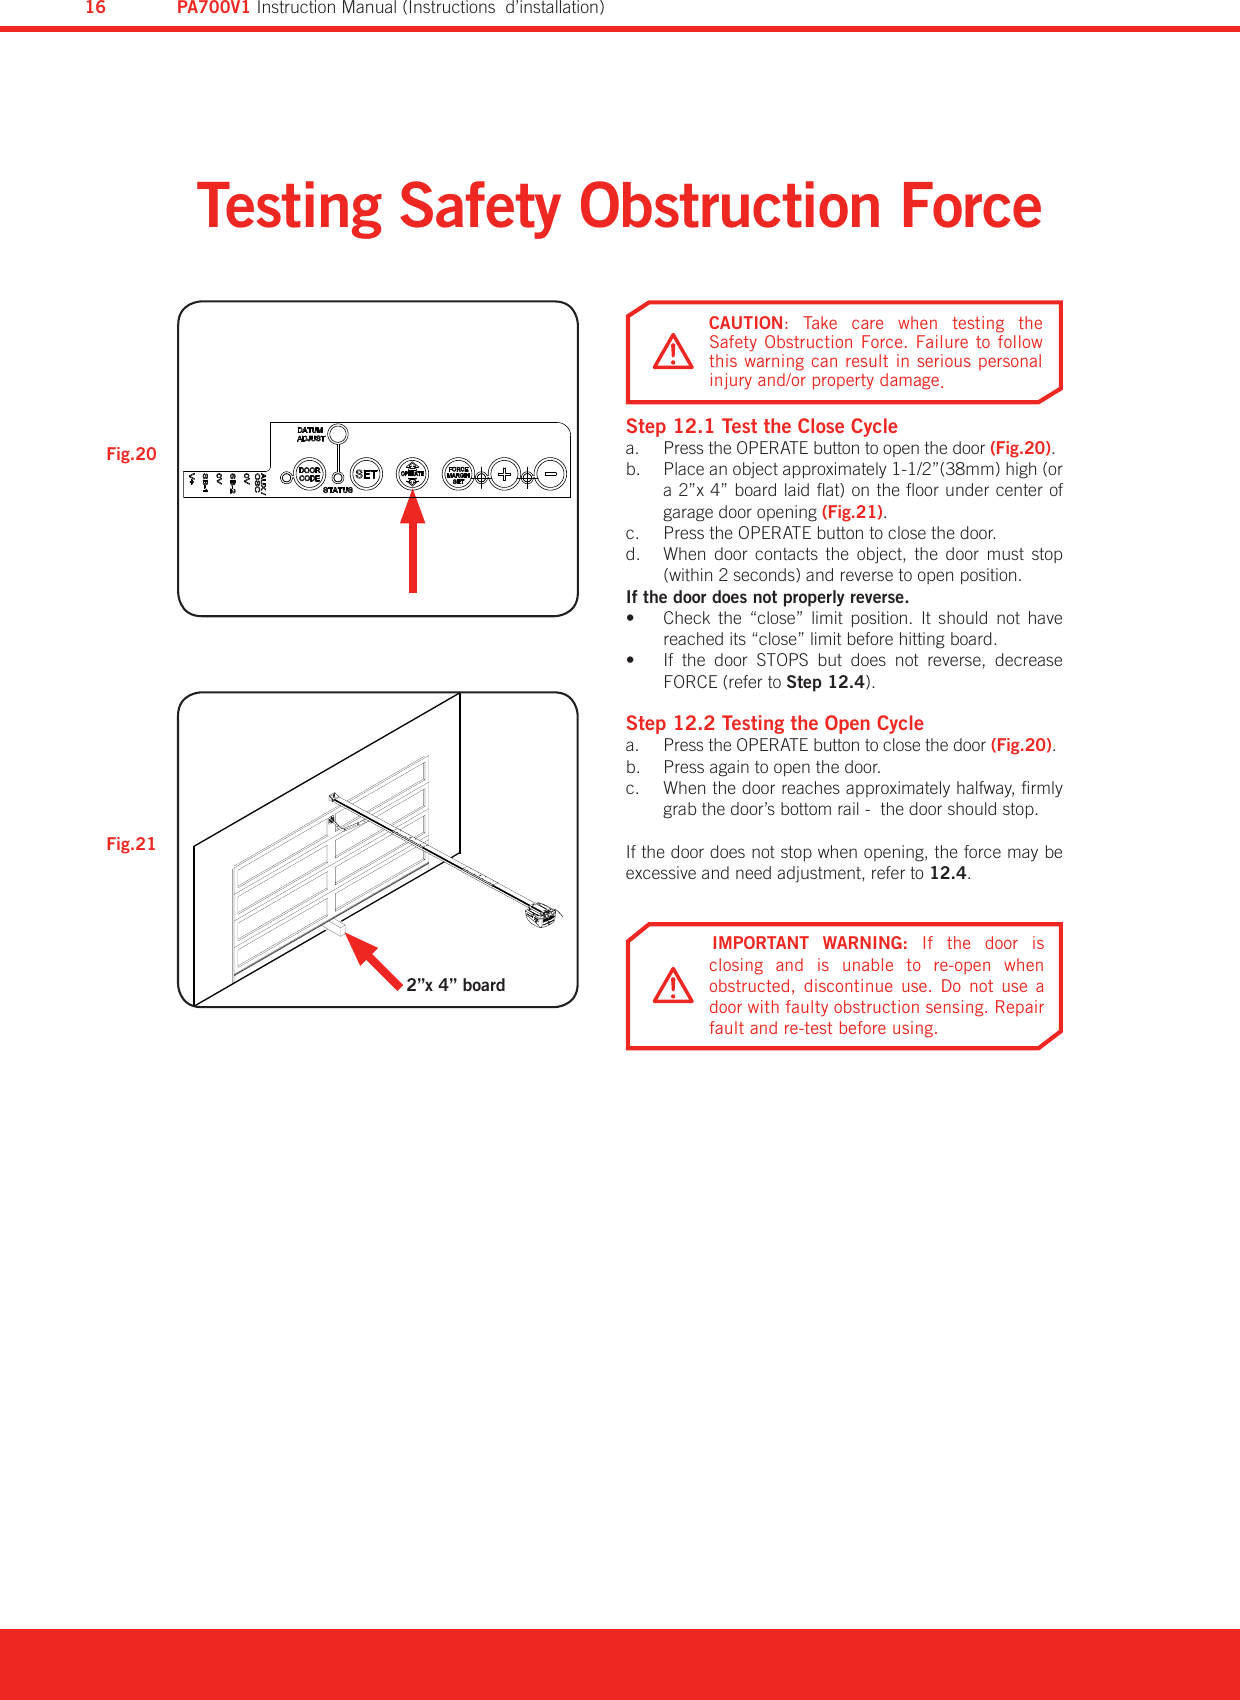 Testing Safety Obstruction ForceStep 12.1 Test the Close CyclePress the OPERATE button to open the door a.  (Fig.20).Place an object approximately 1-1/2”(38mm) high (or b. a 2”x 4” board laid at) on the oor under center of garage door opening (Fig.21).Press the OPERATE button to close the door.c. When  door  contacts  the  object,  the  door  must  stop d. (within 2 seconds) and reverse to open position.If the door does not properly reverse.Check  the  “close”  limit  position.  It  should  not  have • reached its “close” limit before hitting board.If  the  door  STOPS  but  does  not  reverse,  decrease • FORCE (refer to Step 12.4).Step 12.2 Testing the Open CyclePress the OPERATE button to close the door a.  (Fig.20).Press again to open the door.b. When the door reaches approximately halfway, rmly c. grab the door’s bottom rail -  the door should stop.If the door does not stop when opening, the force may be excessive and need adjustment, refer to 12.4.Fig.21Fig.20IMPORTANT  WARNING:  If  the  door  is closing  and  is  unable  to  re-open  when obstructed,  discontinue  use.  Do  not  use  a door with faulty obstruction sensing. Repair fault and re-test before using.CAUTION:  Take  care  when  testing  the Safety Obstruction Force. Failure to follow this warning can result in serious personal injury and/or property damage.2”x 4” boardPA700V1 Instruction Manual (Instructions  d’installation)16